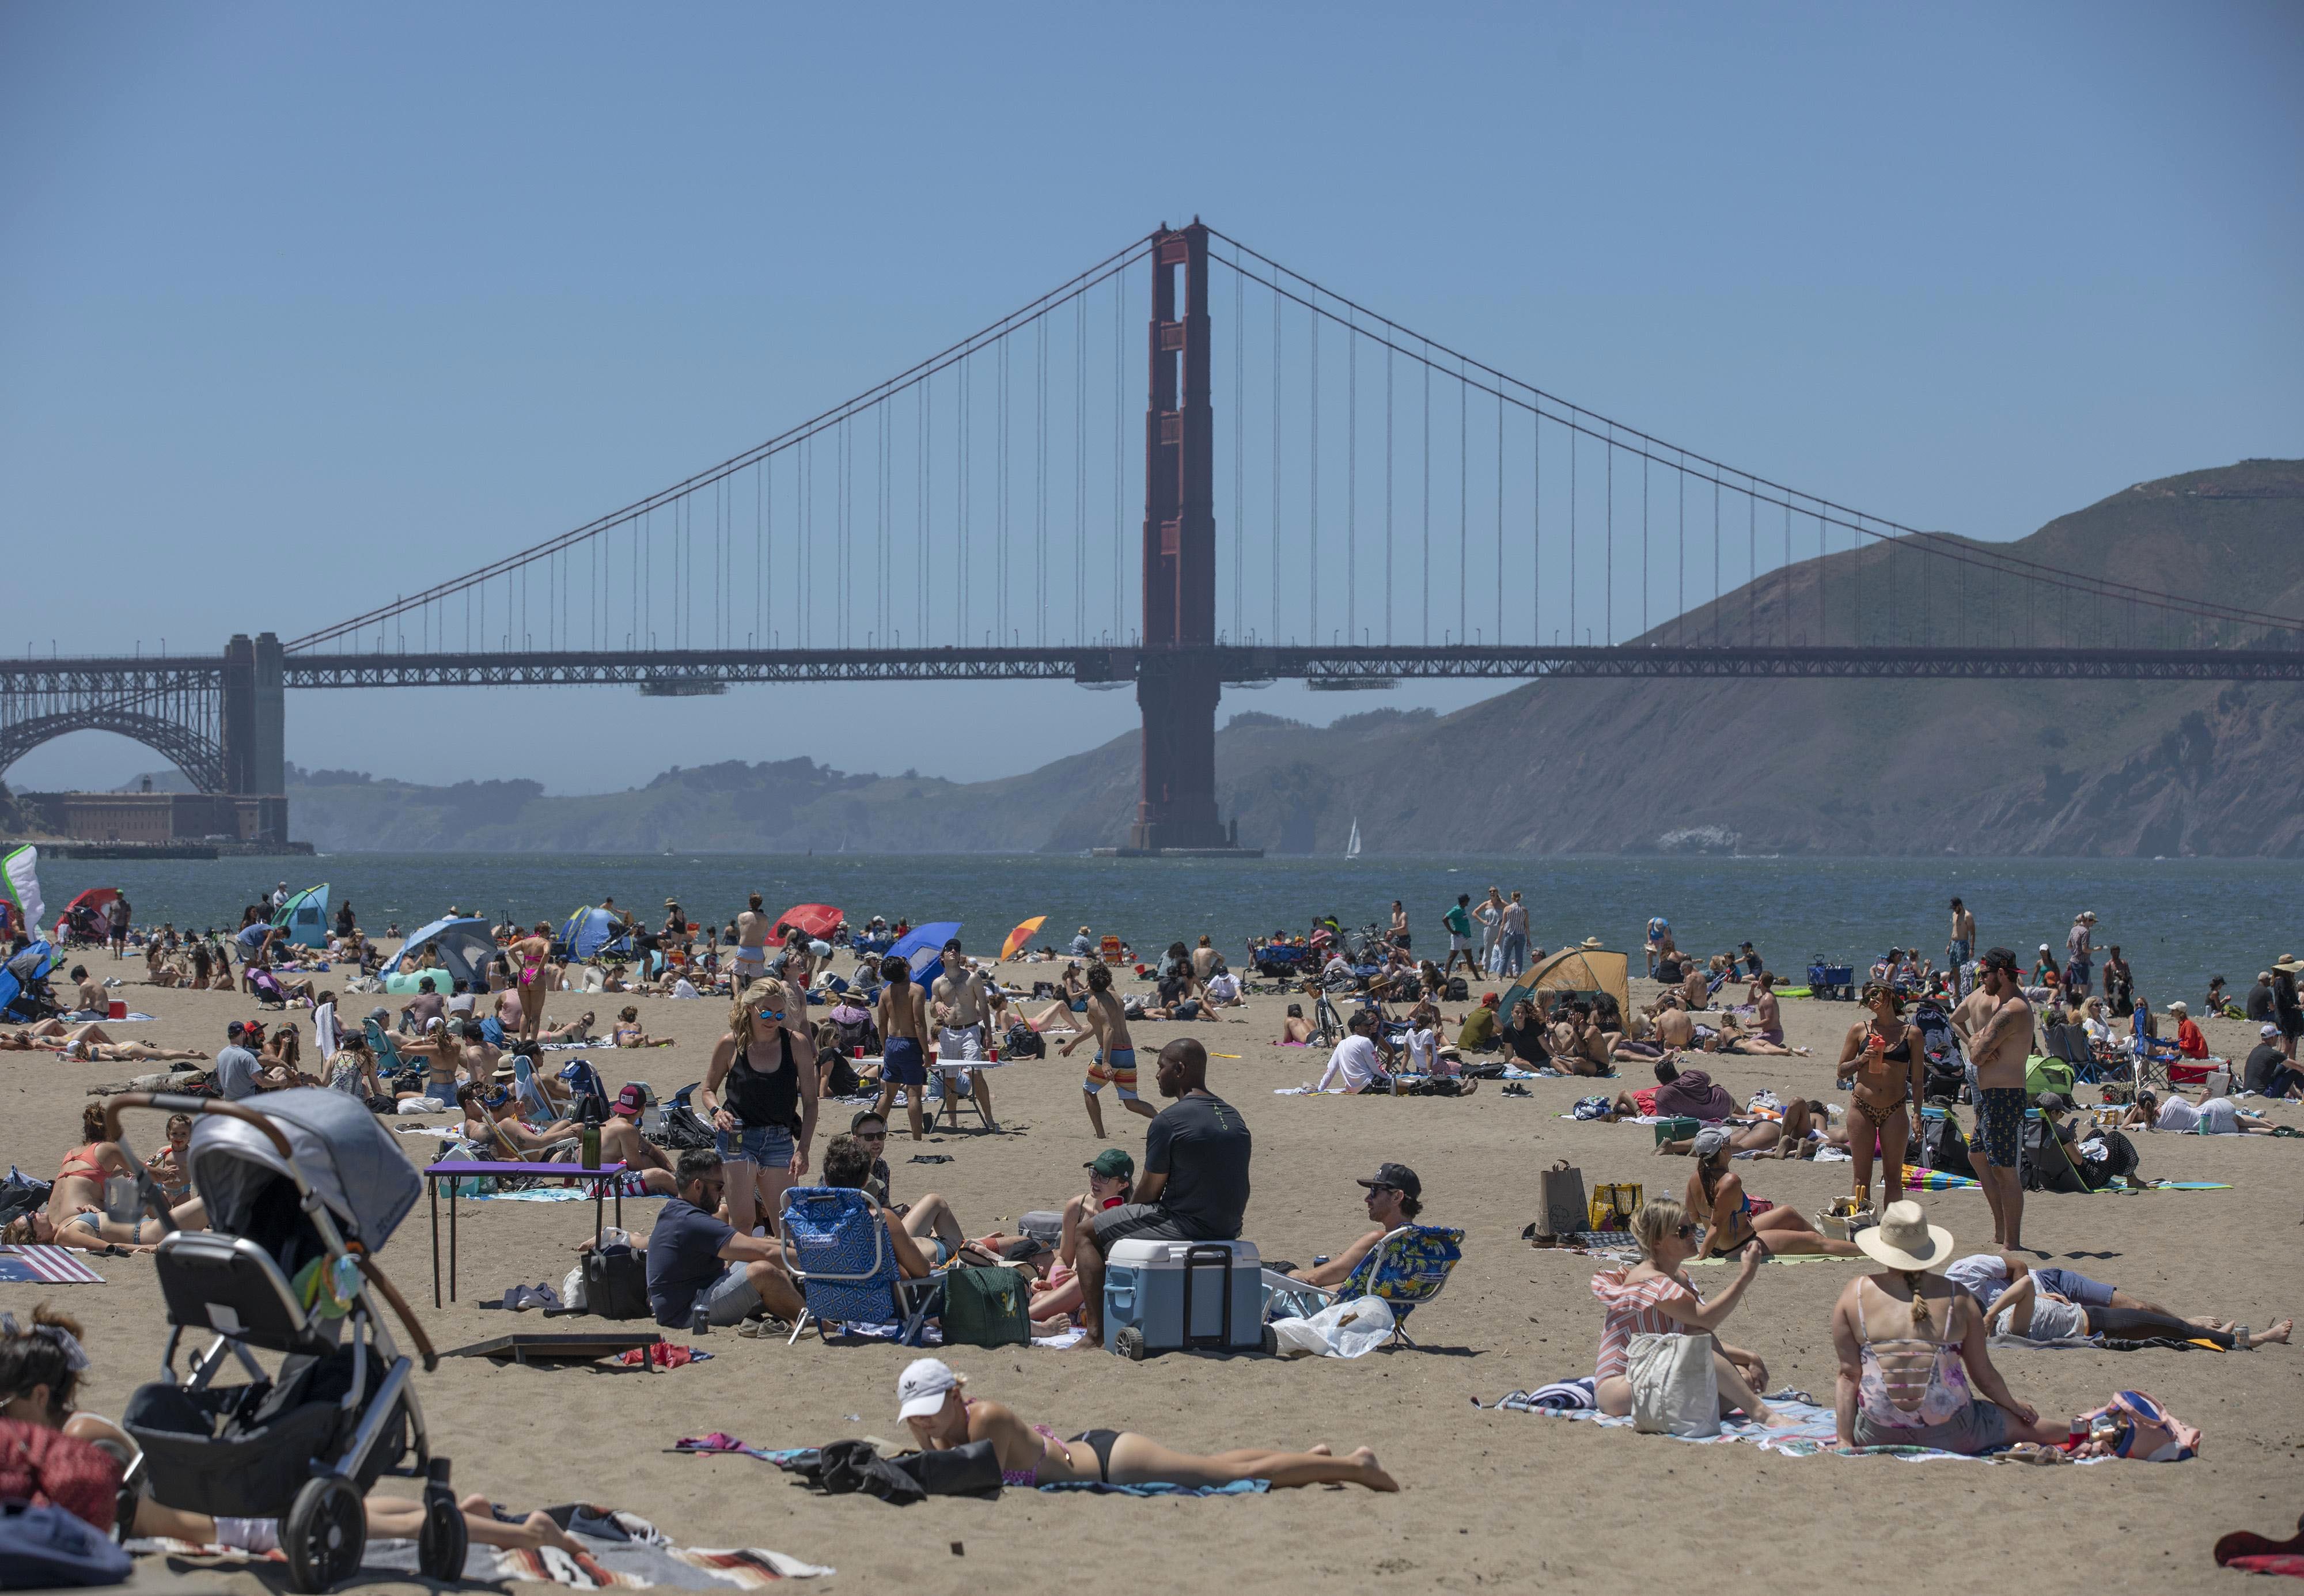 People visit a beach near the Golden Gate Bridge in San Francisco on May 25.